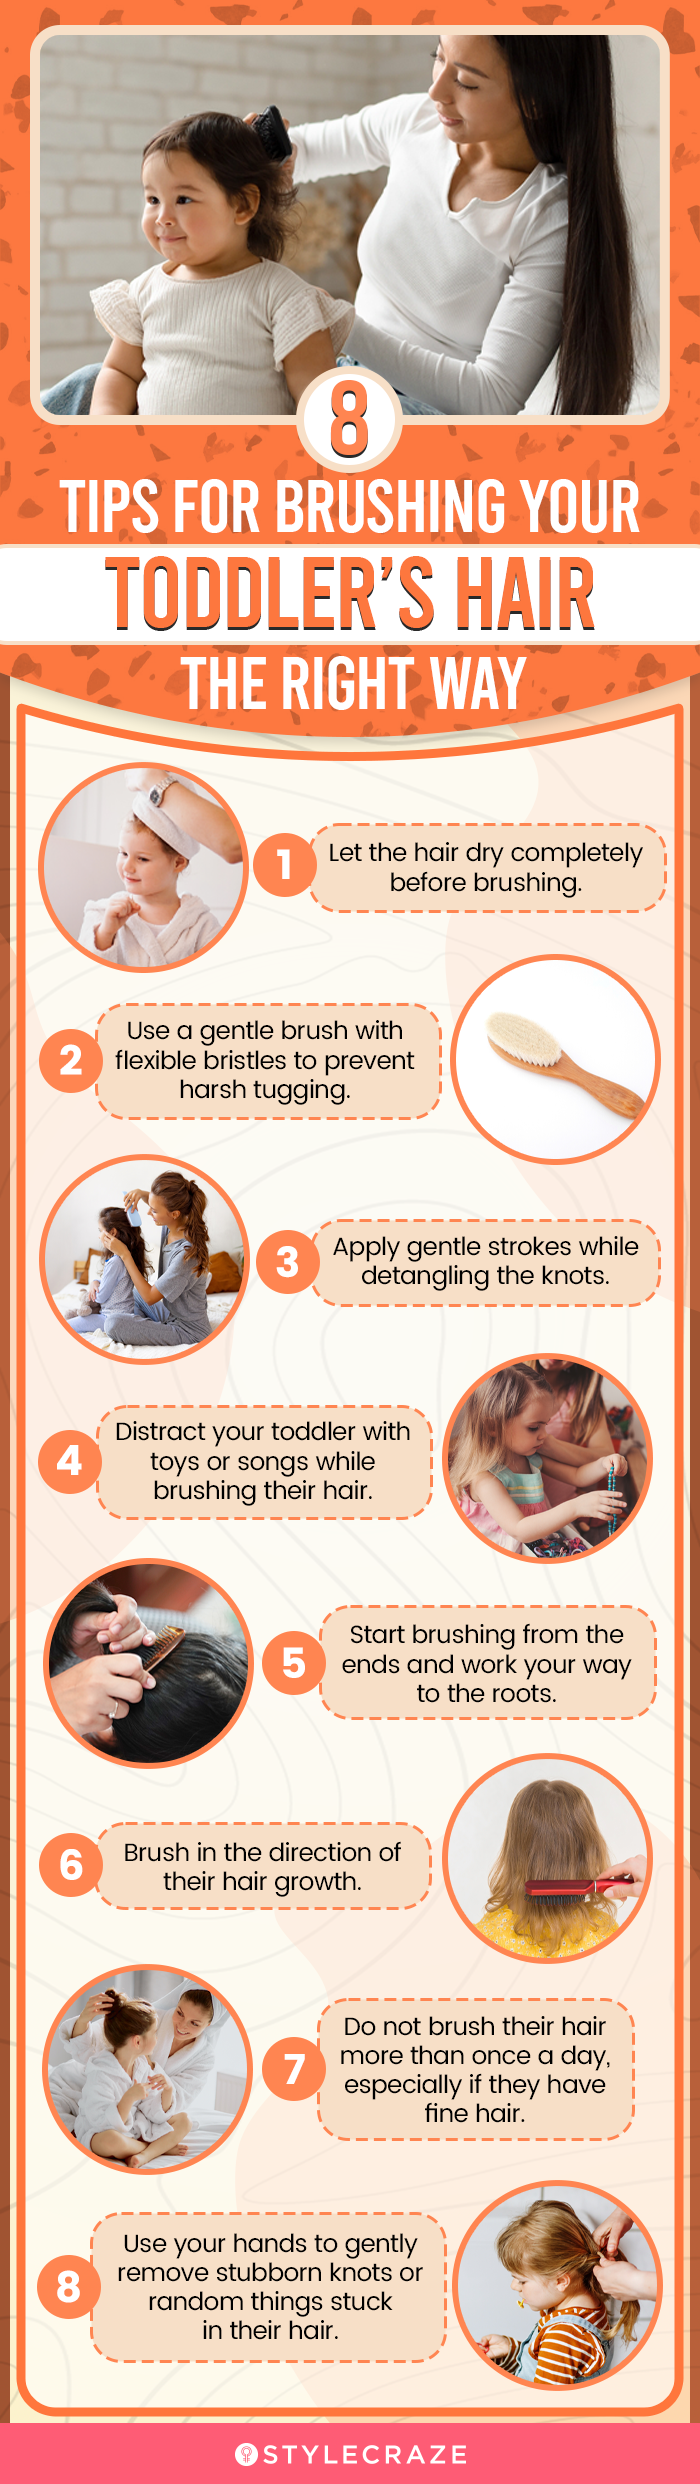 8 Tips For Brushing Your Toddler’s Hair The Right Way (infographic)